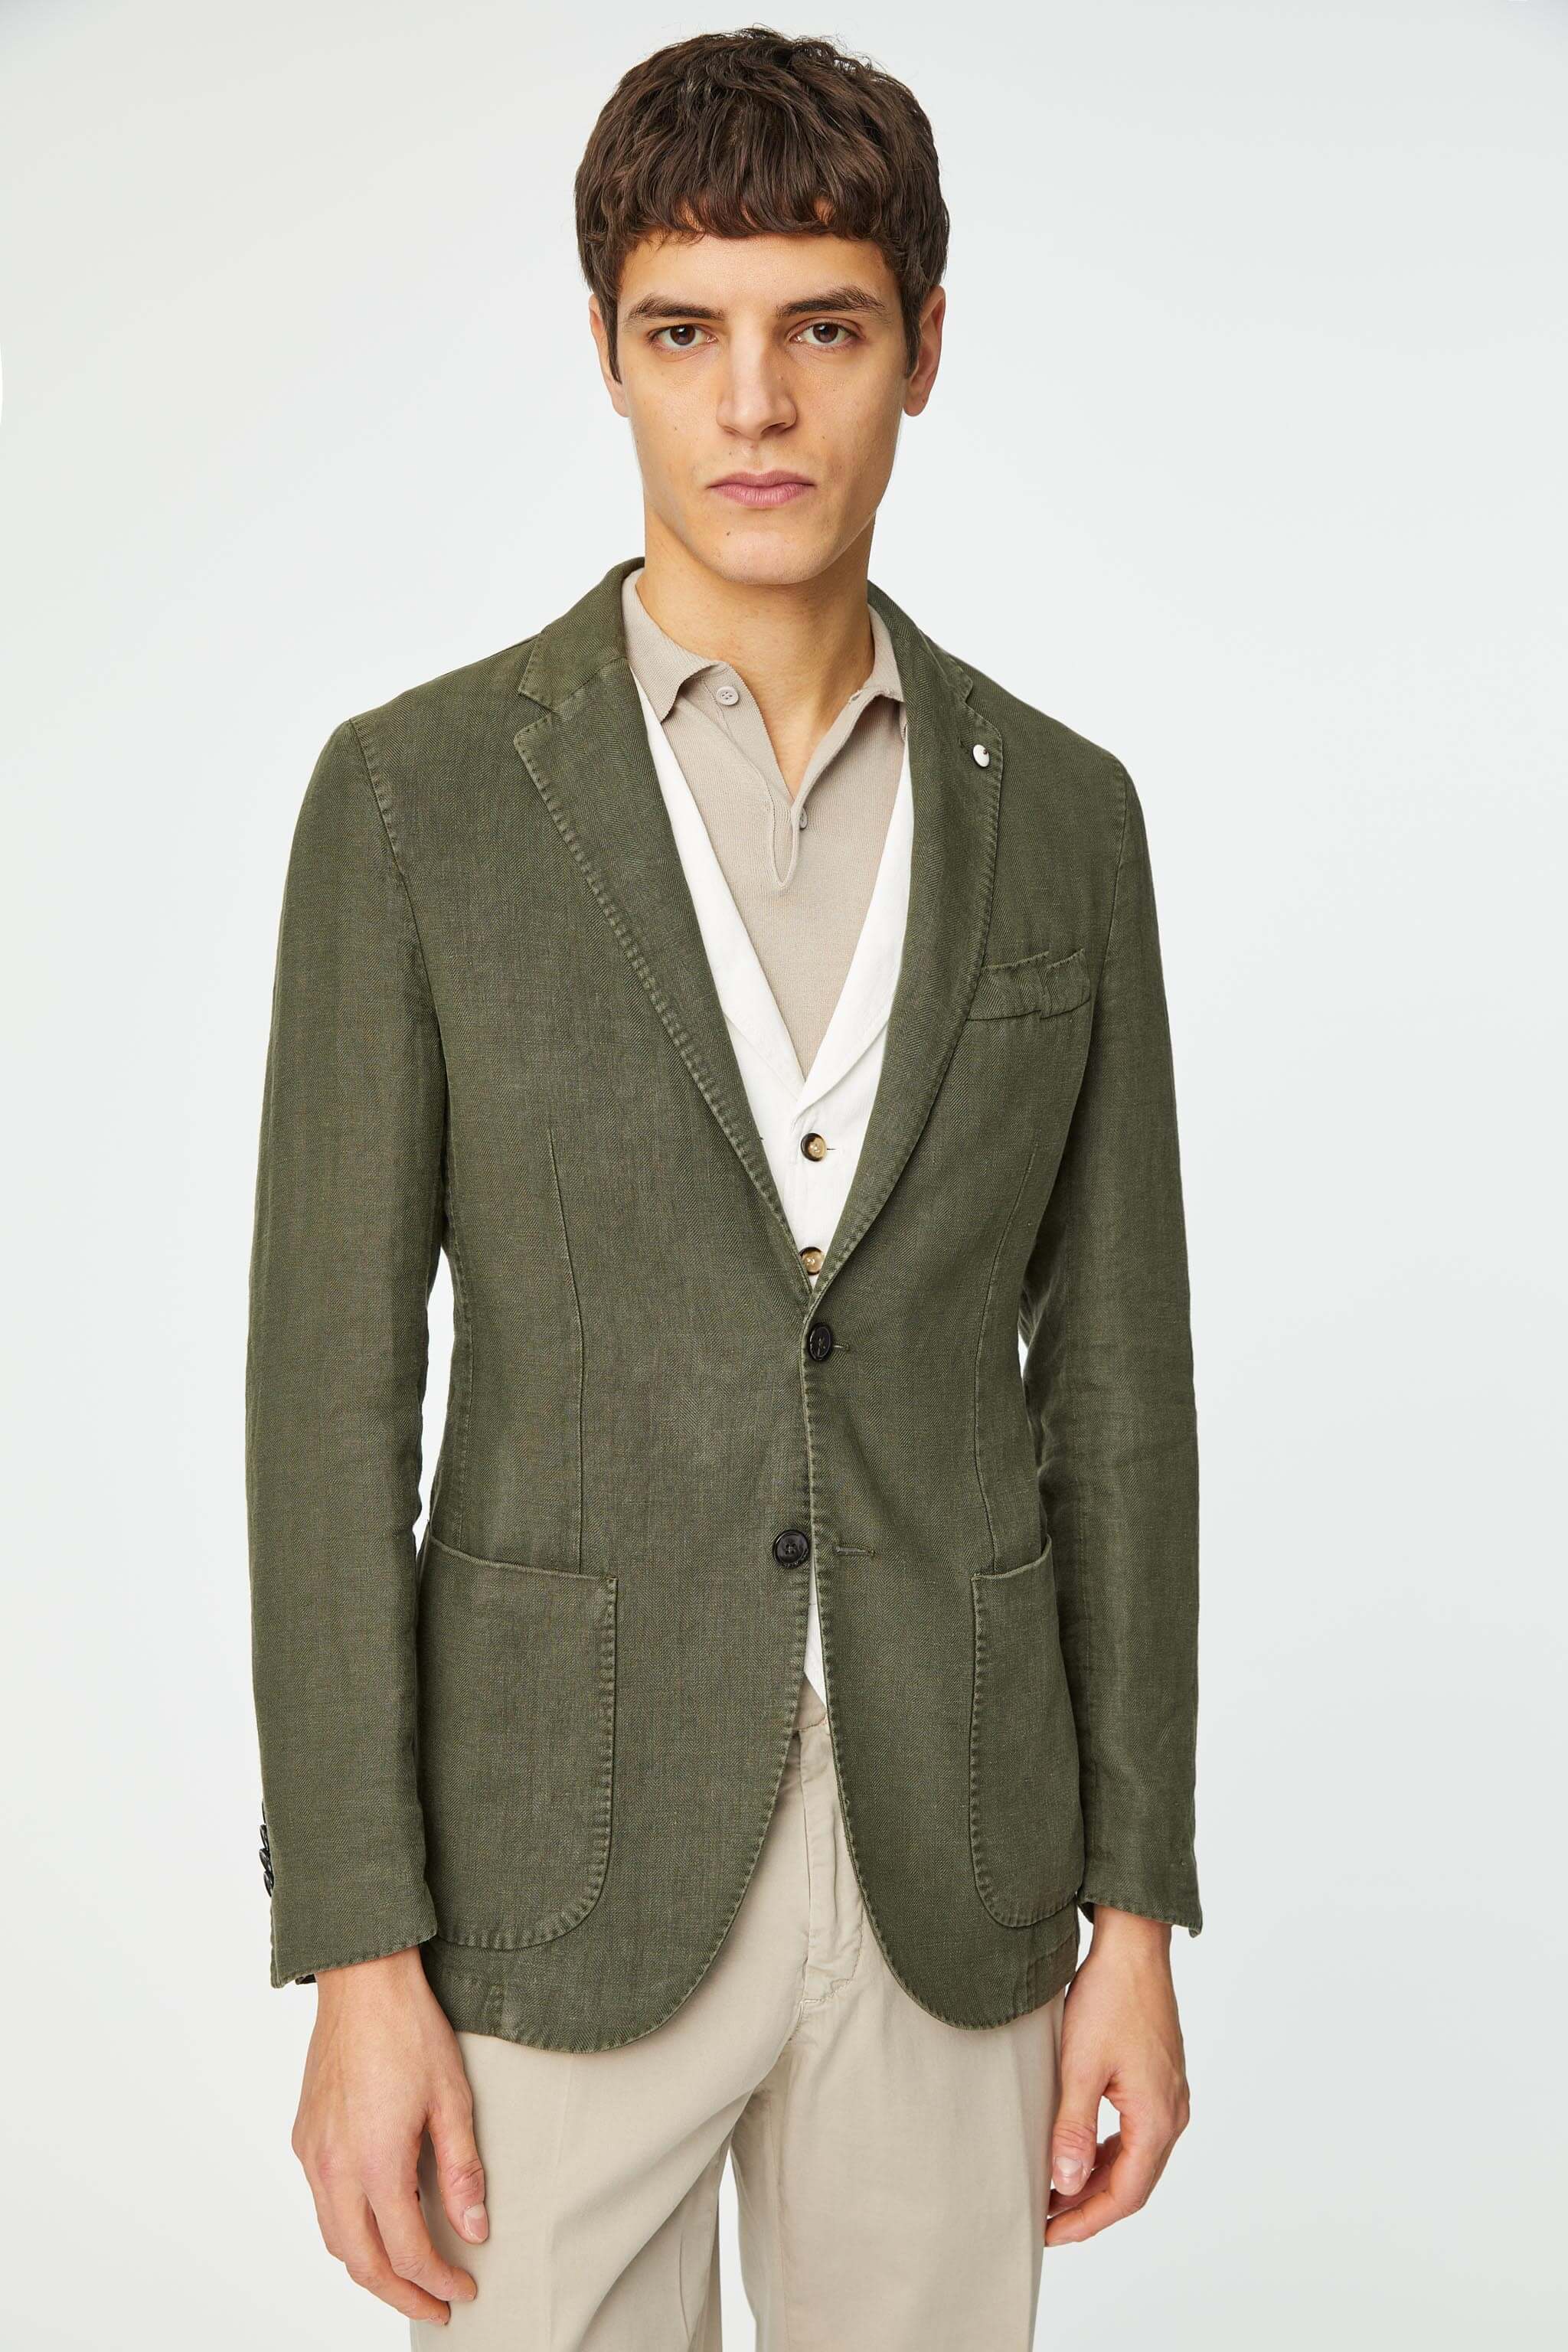 Garment-dyed JACK jacket in army green